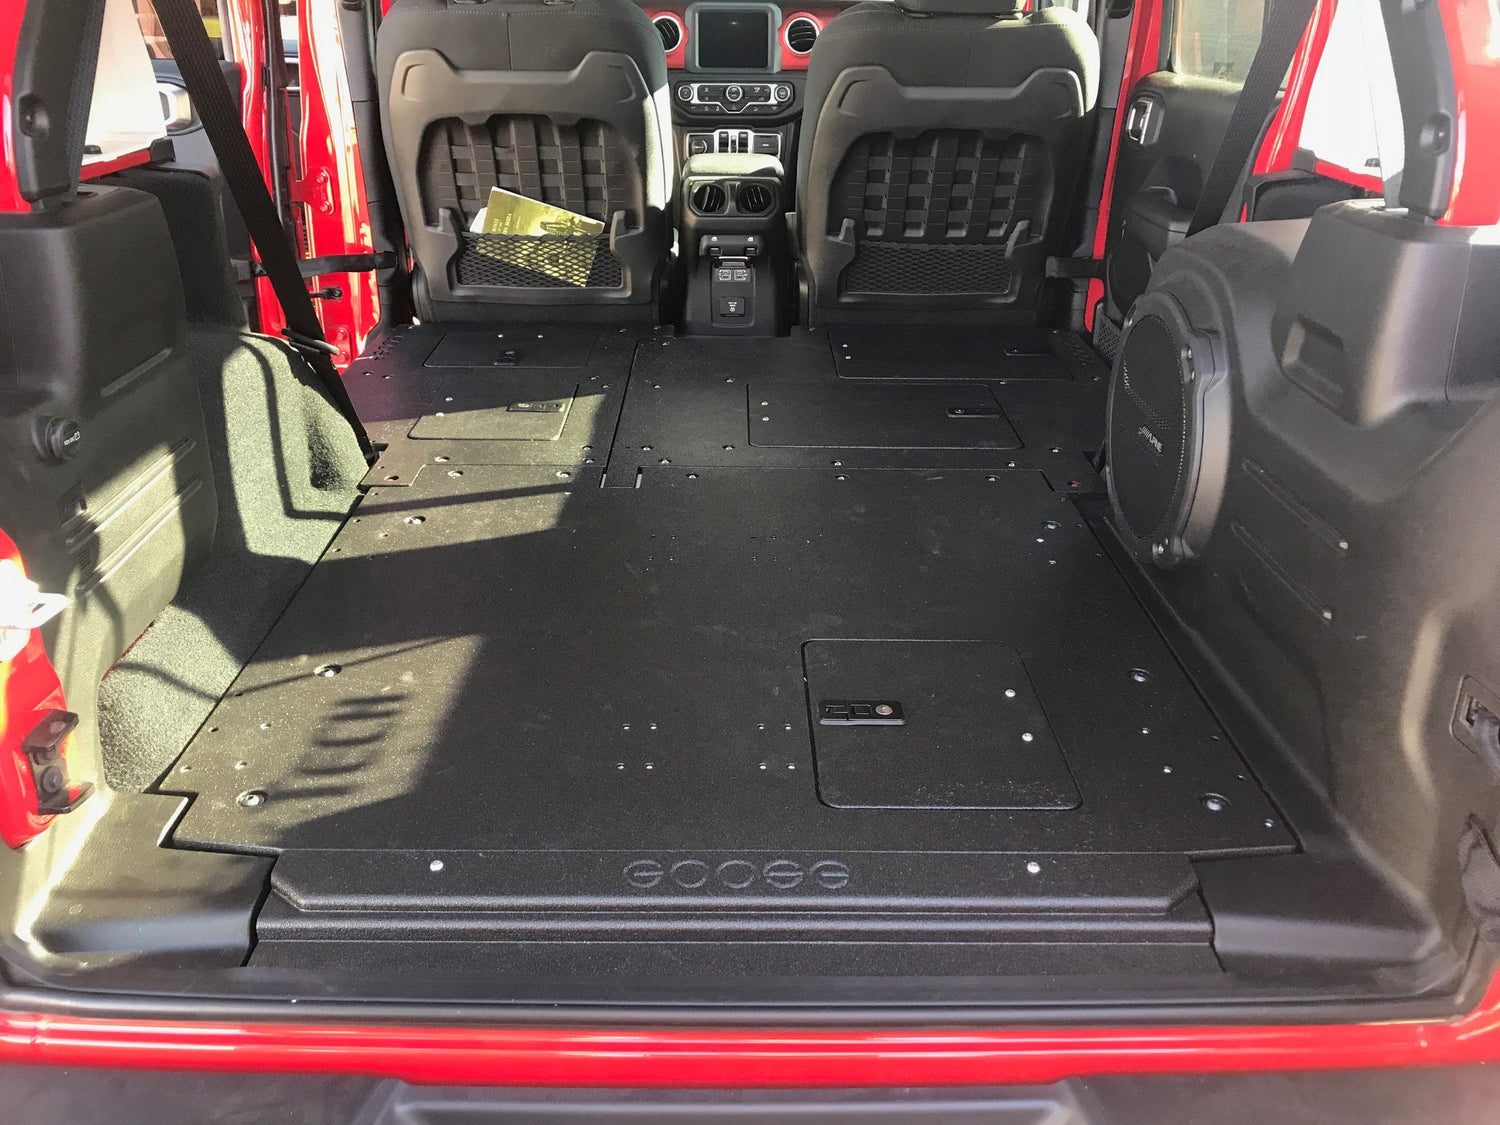 Jeep JLU Plate Systems are Now Available for Certain Models - Goose Gear